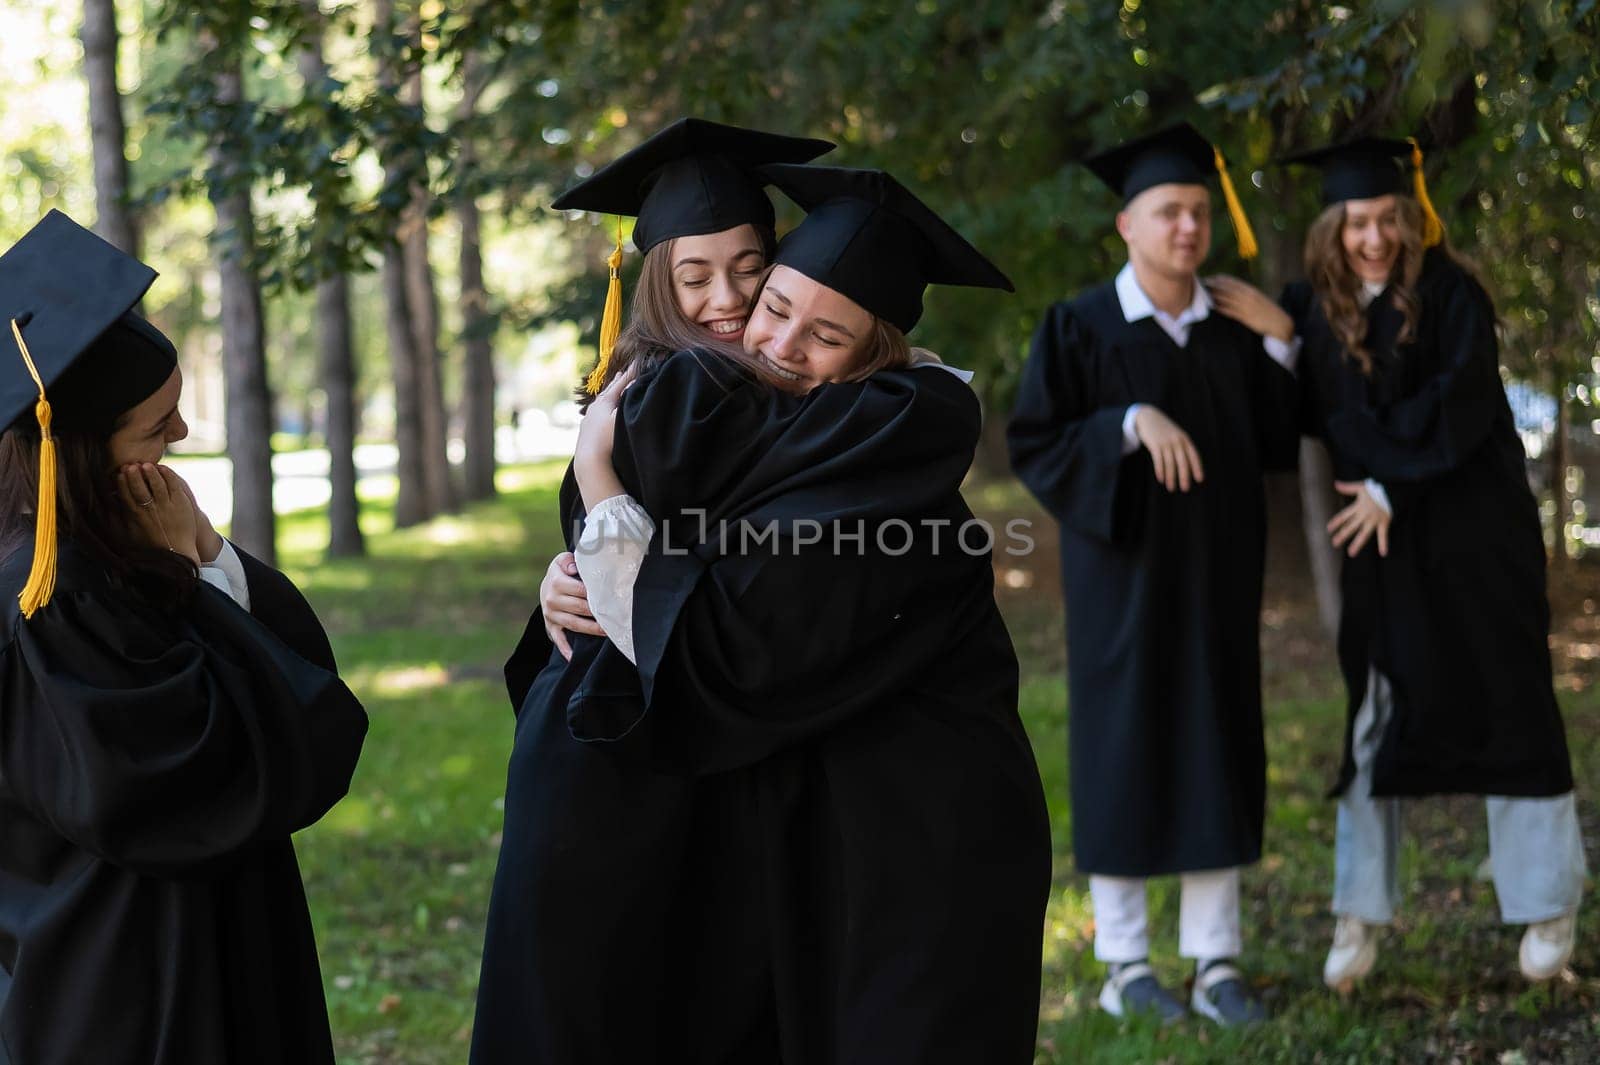 Group of happy students in graduation gowns outdoors. In the foreground, two young girls congratulate each other and embrace. by mrwed54